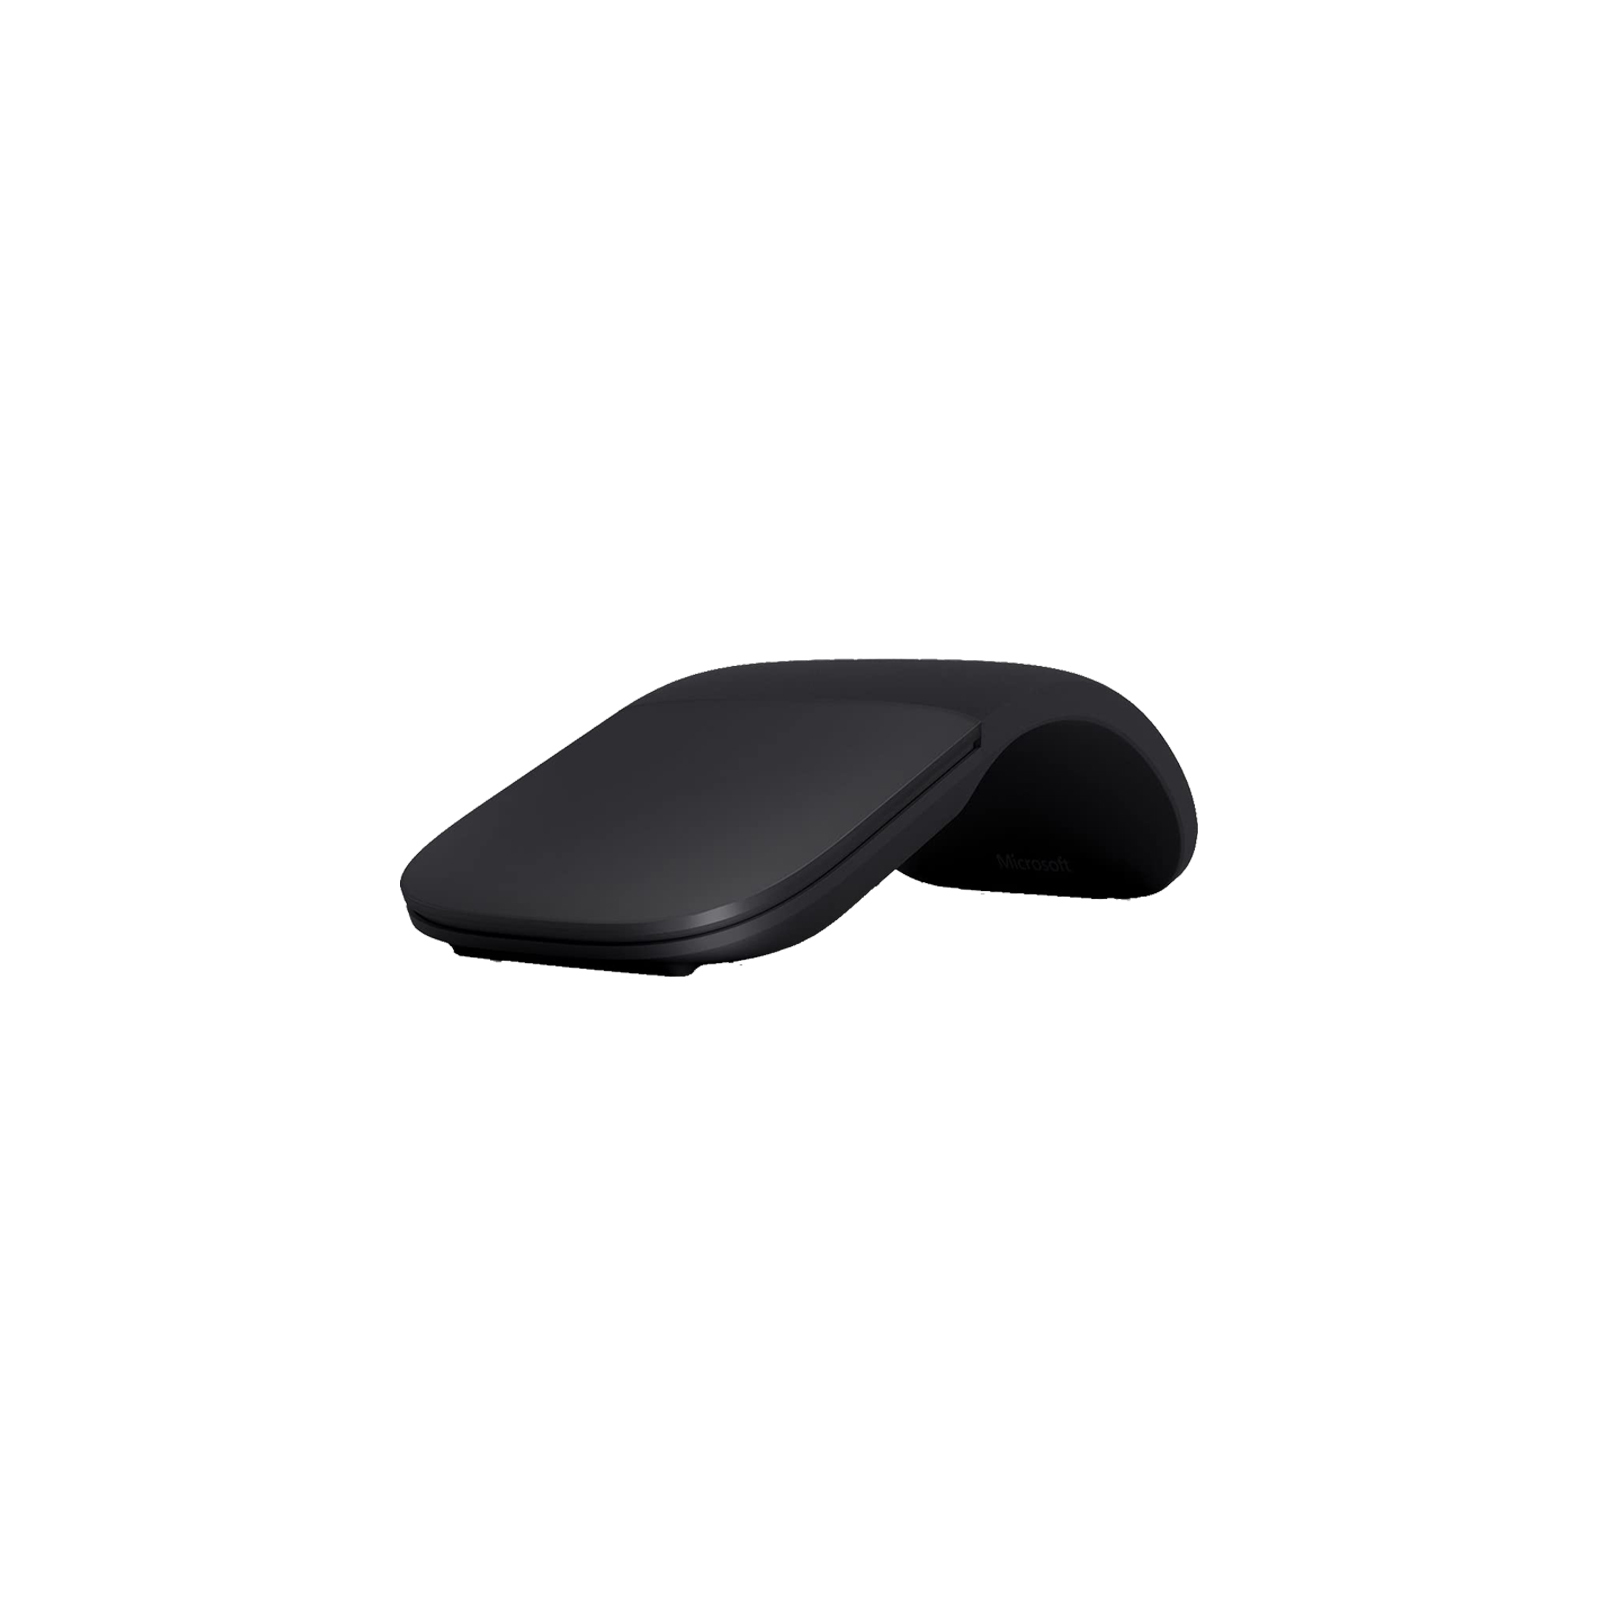 Microsoft Surface Arc Mouse [Brand New]